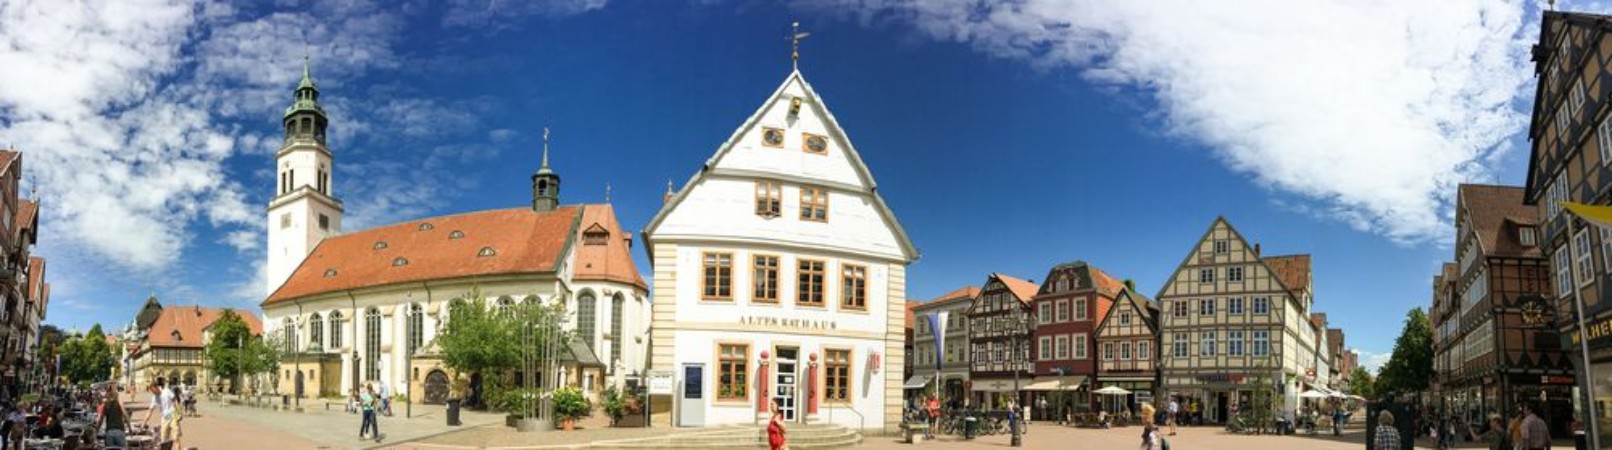 Picture of CELLE GERMANY - JULY 2016 Tourists visit city center Celle attracts 3 million people annually